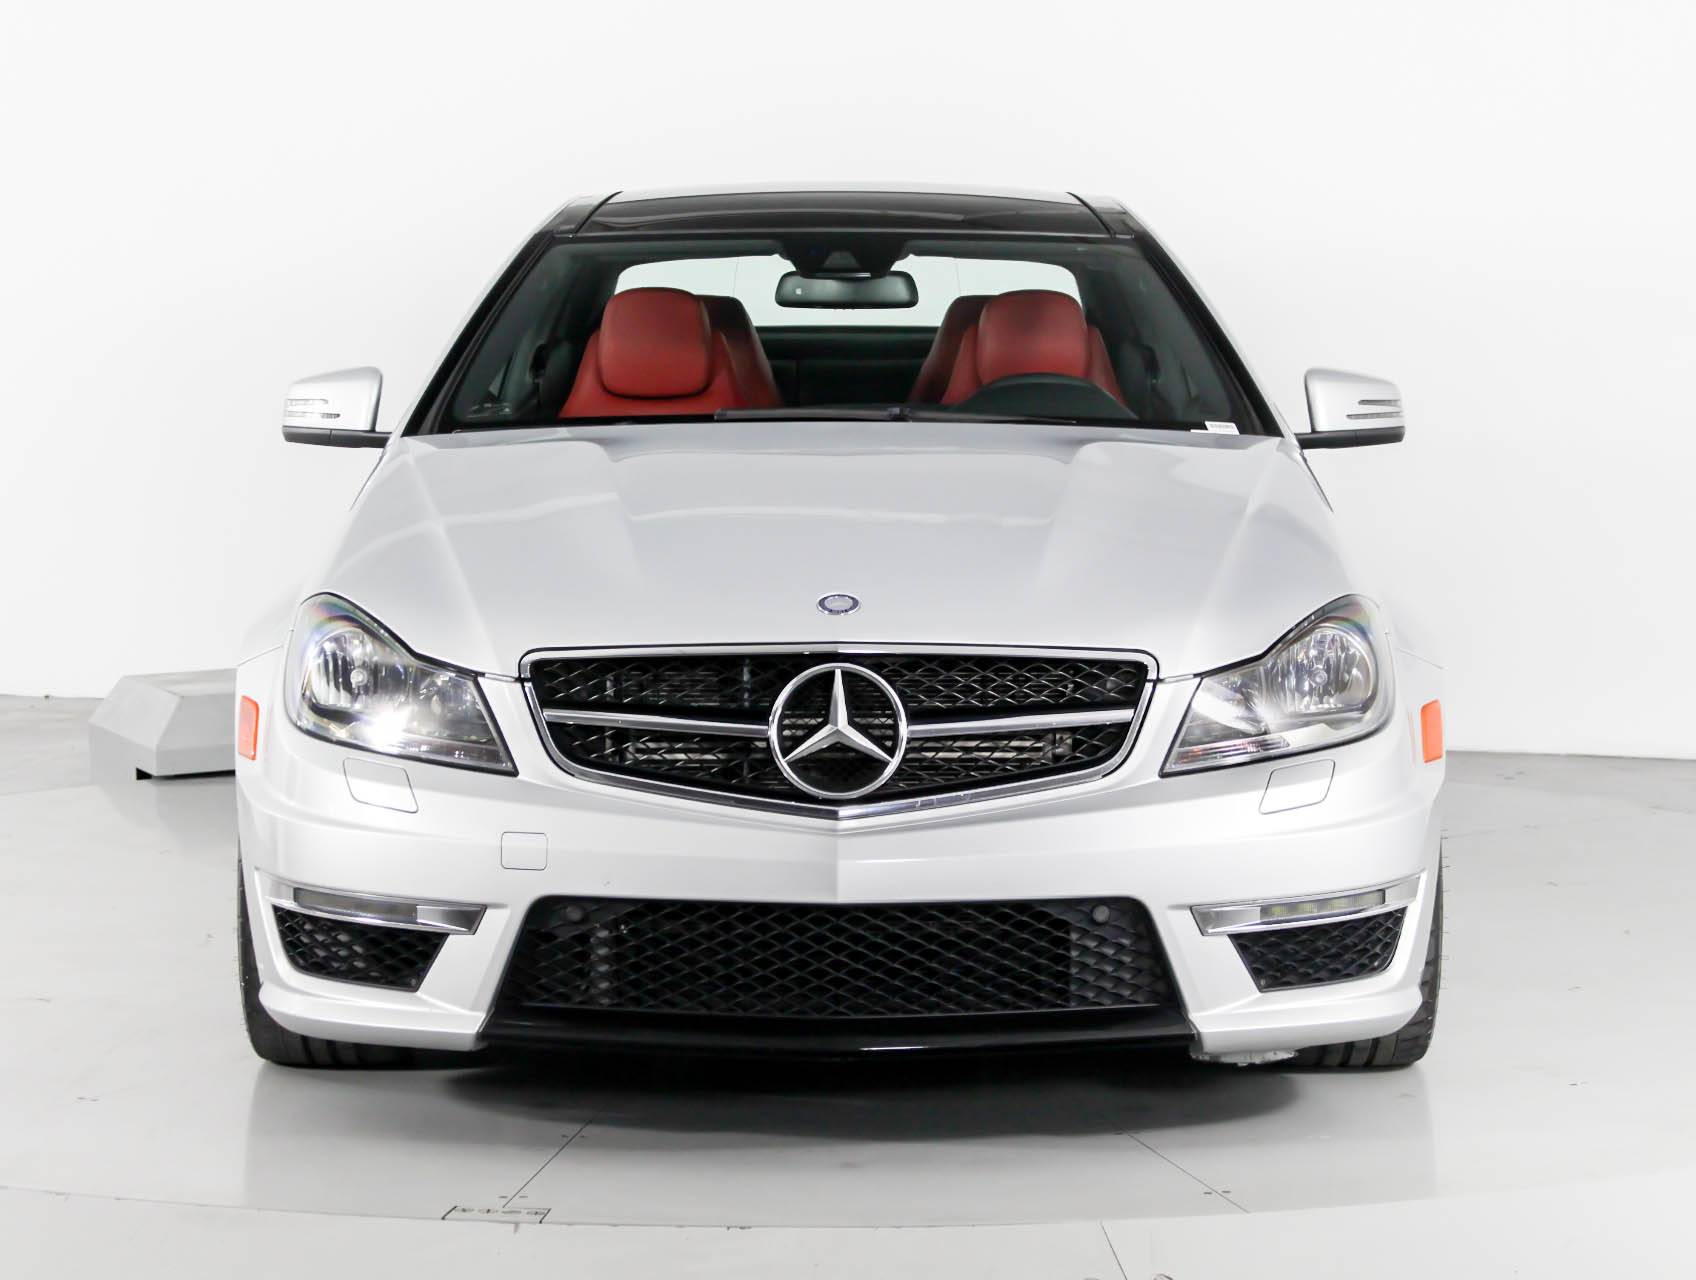 Florida Fine Cars - Used MERCEDES-BENZ C CLASS 2013 HOLLYWOOD C63 AMG